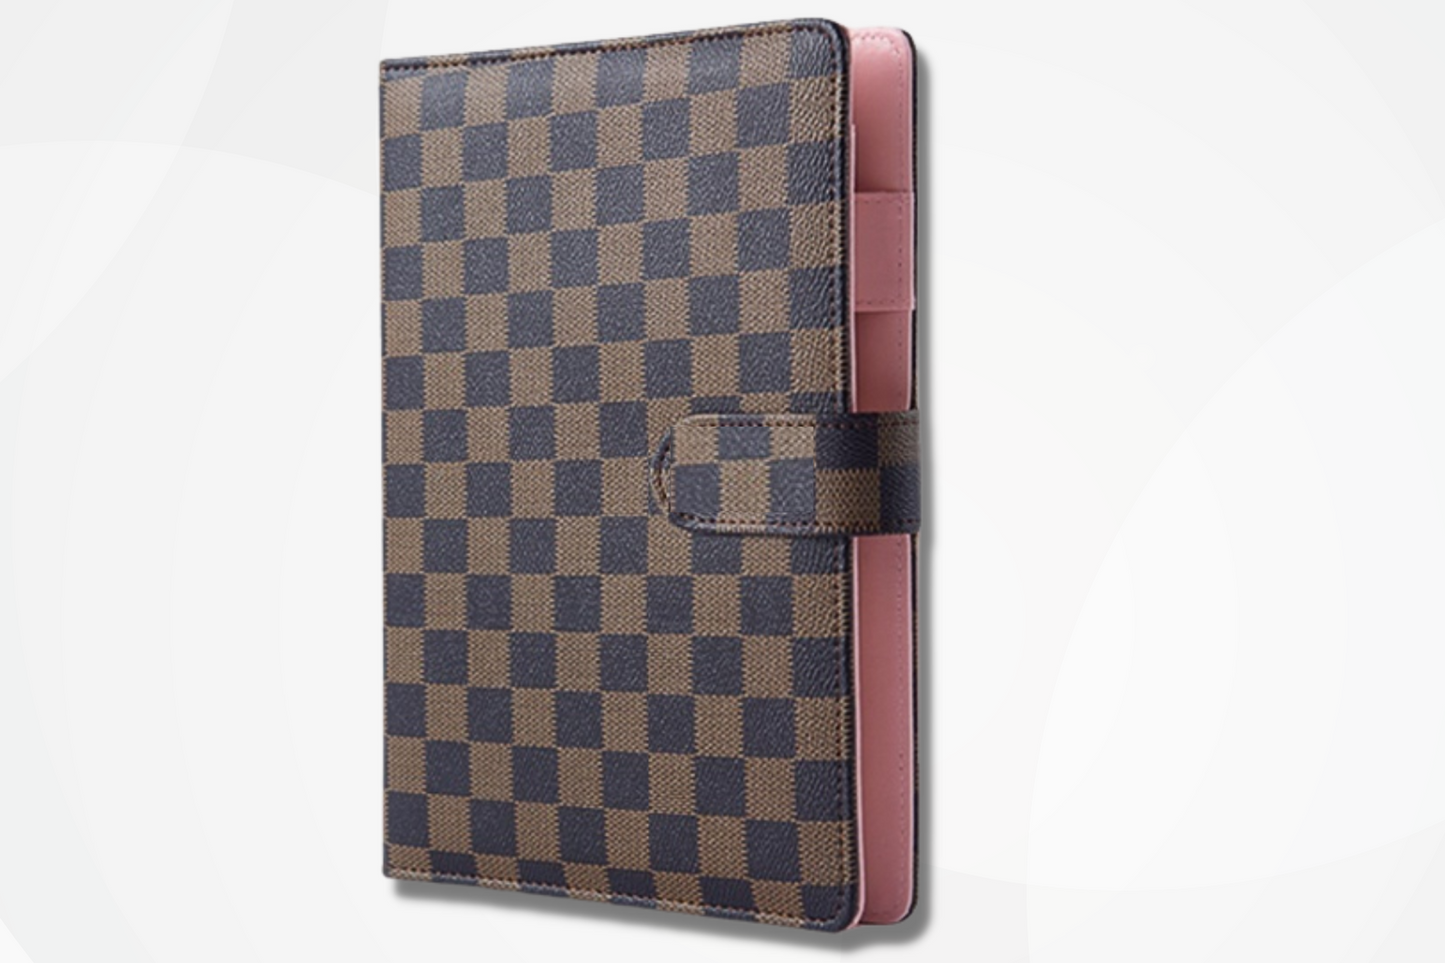 Checkered leather budget binder with 10 insert pockets-(Brown